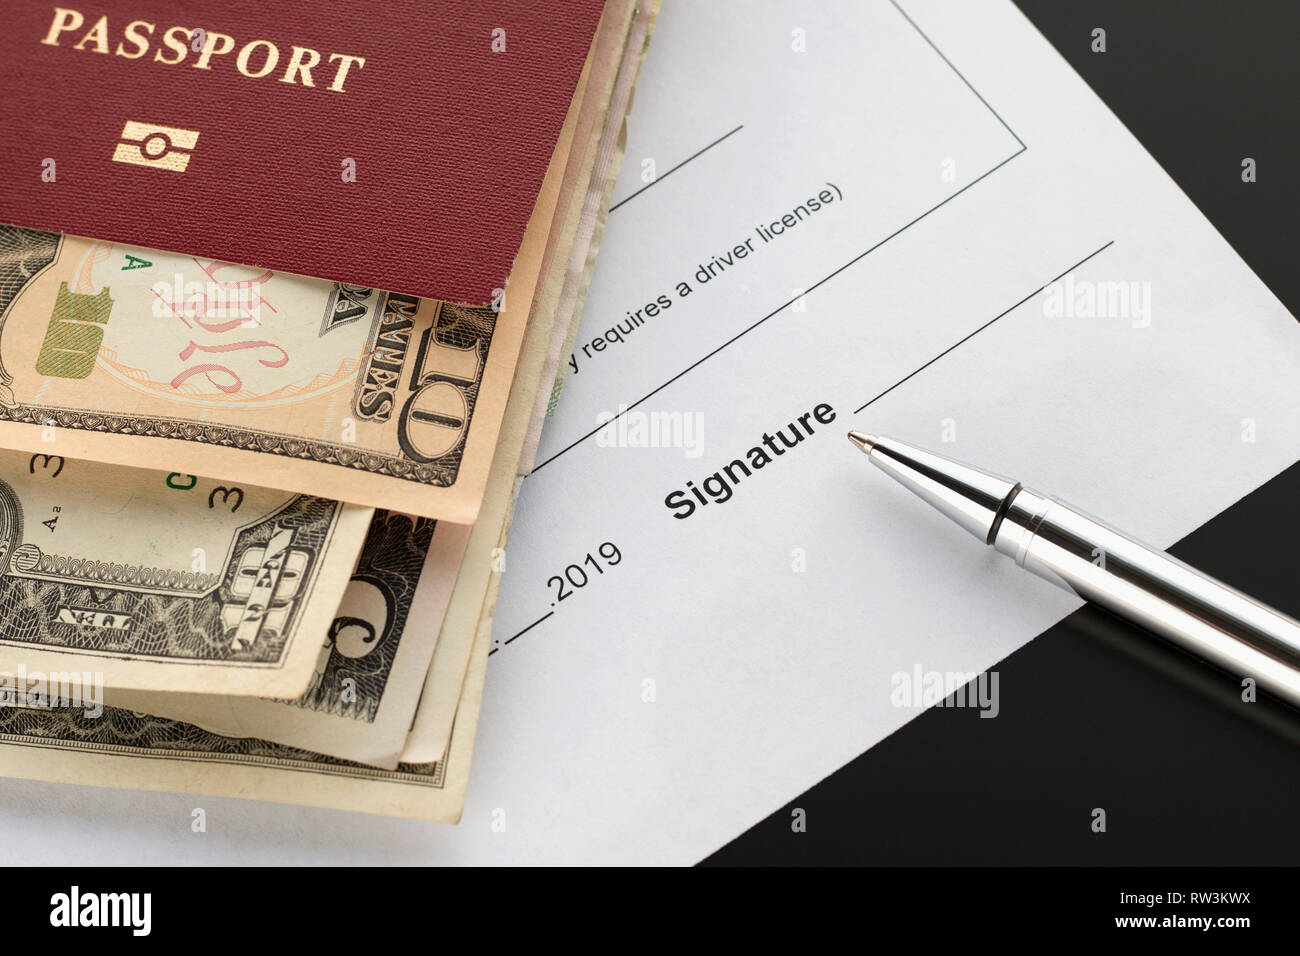 Signing a document, space for signature Passport with banknotes, pen. Topics of cash reward, insurance compensation, financial compensation Stock Photo